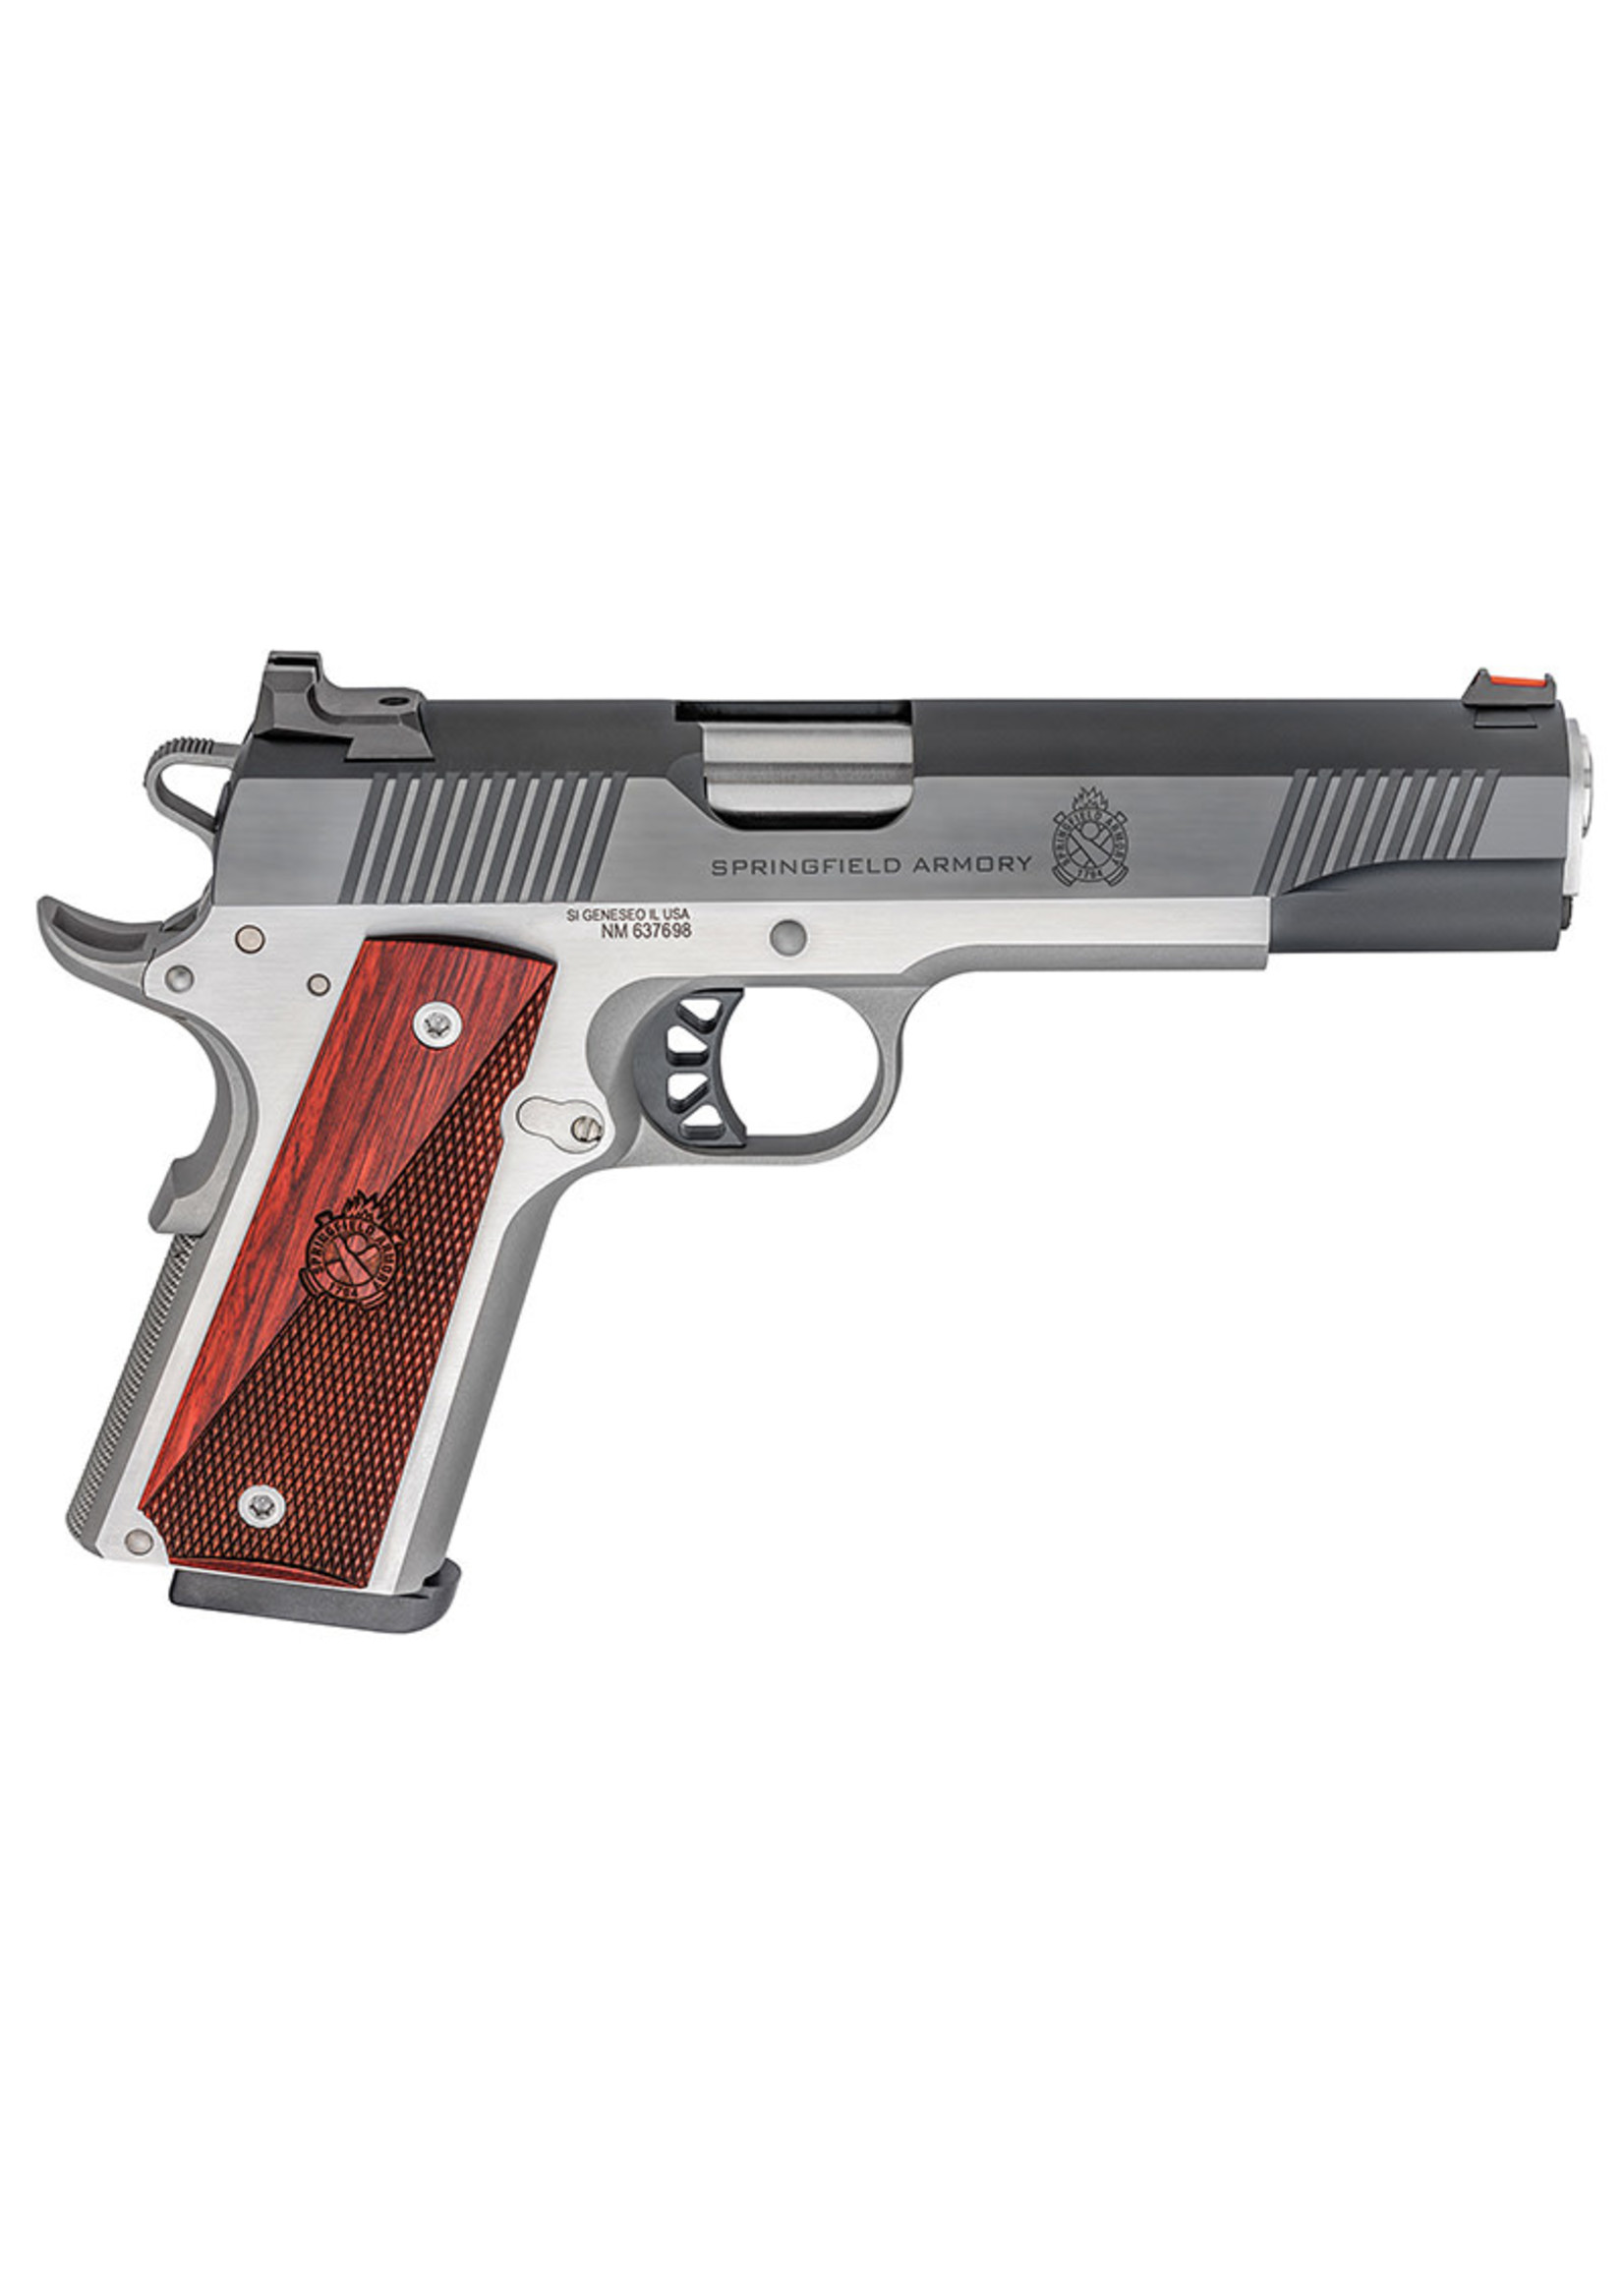 Springfield Armory Springfield Armory PX9120L 1911 Ronin 45 ACP 8+1 5" Barrel, Stainless Steel Frame w/Beavertail, Serrated Blued Carbon Steel Slide, Hybrid Smooth/Checkered Crossed Cannon Wood Laminate Grip